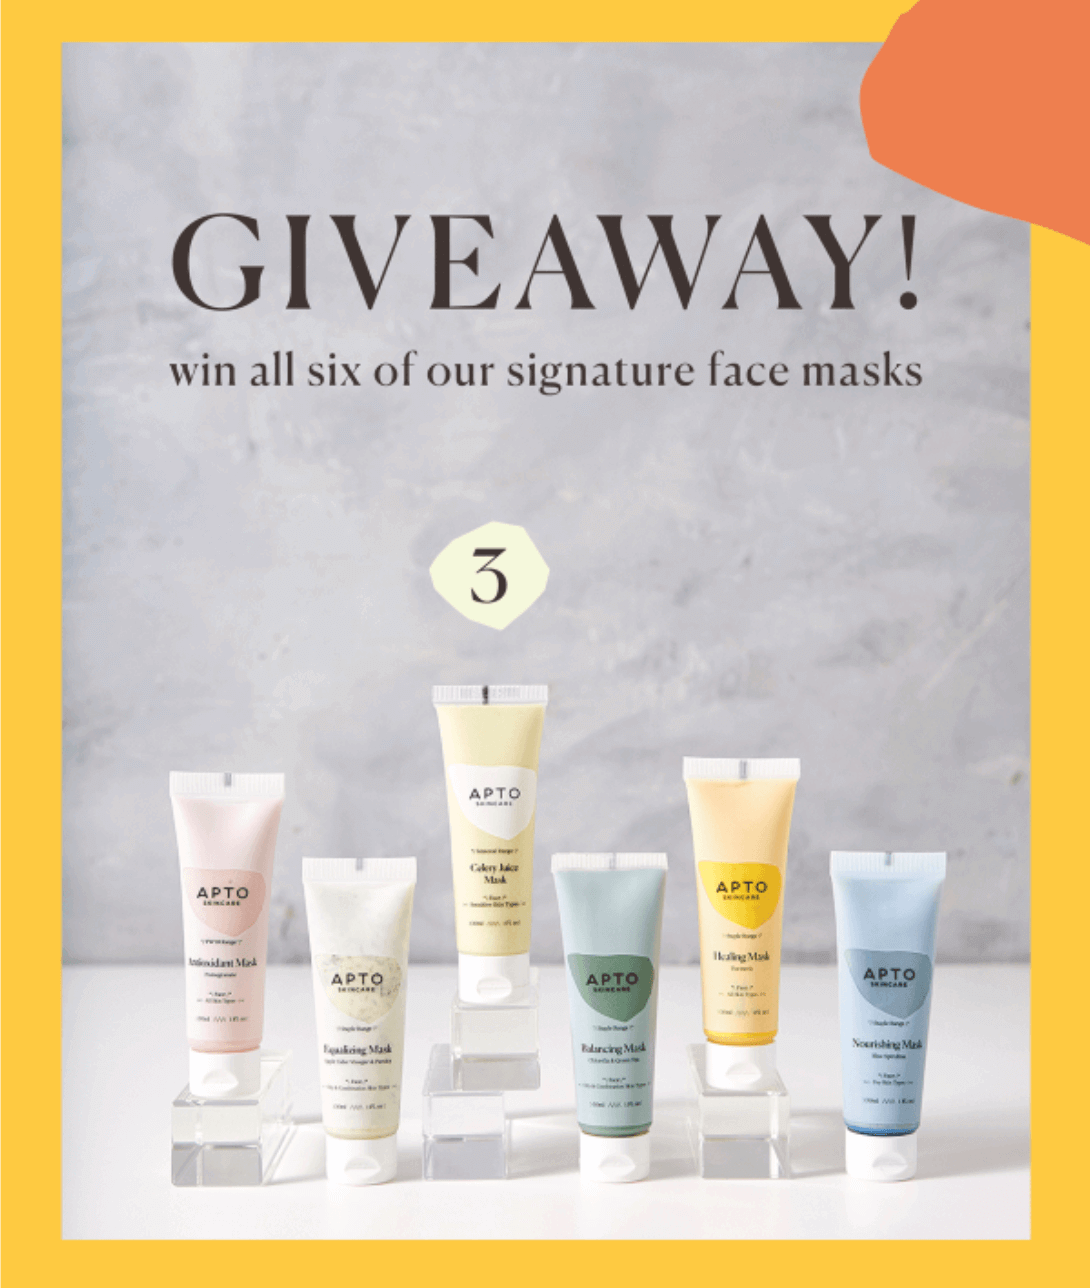 Apto Skincare ran a giveaway. This is an effective way to grow a list, and encourage product use and trial. Remarketing to this group will be easier, cheaper and more effective.